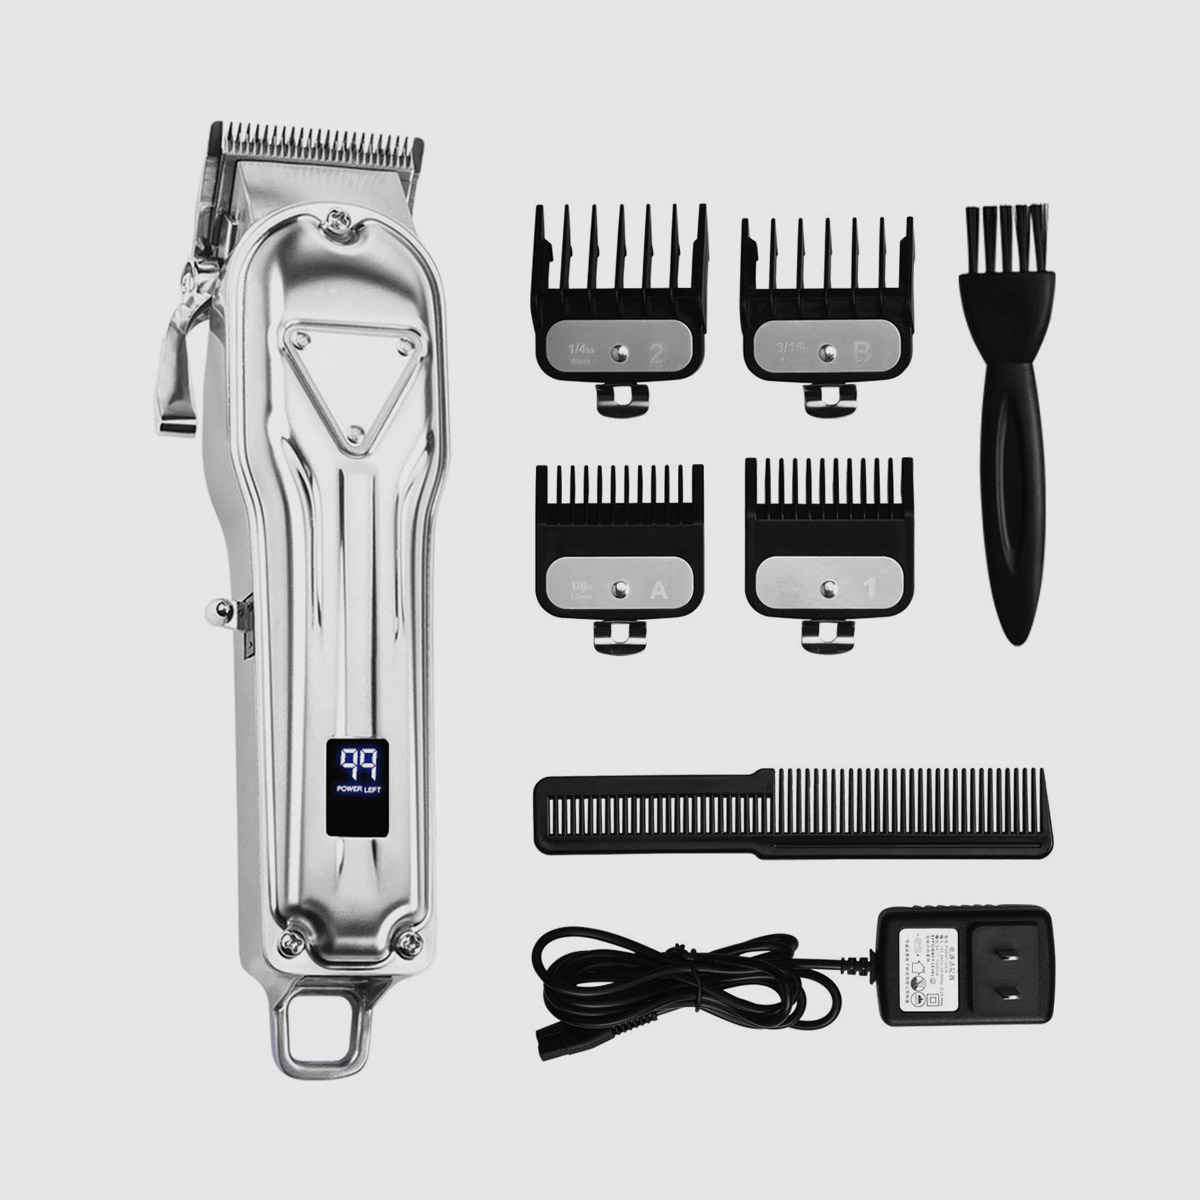 Pro Cordless Hair Clippers for Men Stylists Barbers Kids Home Using - 0